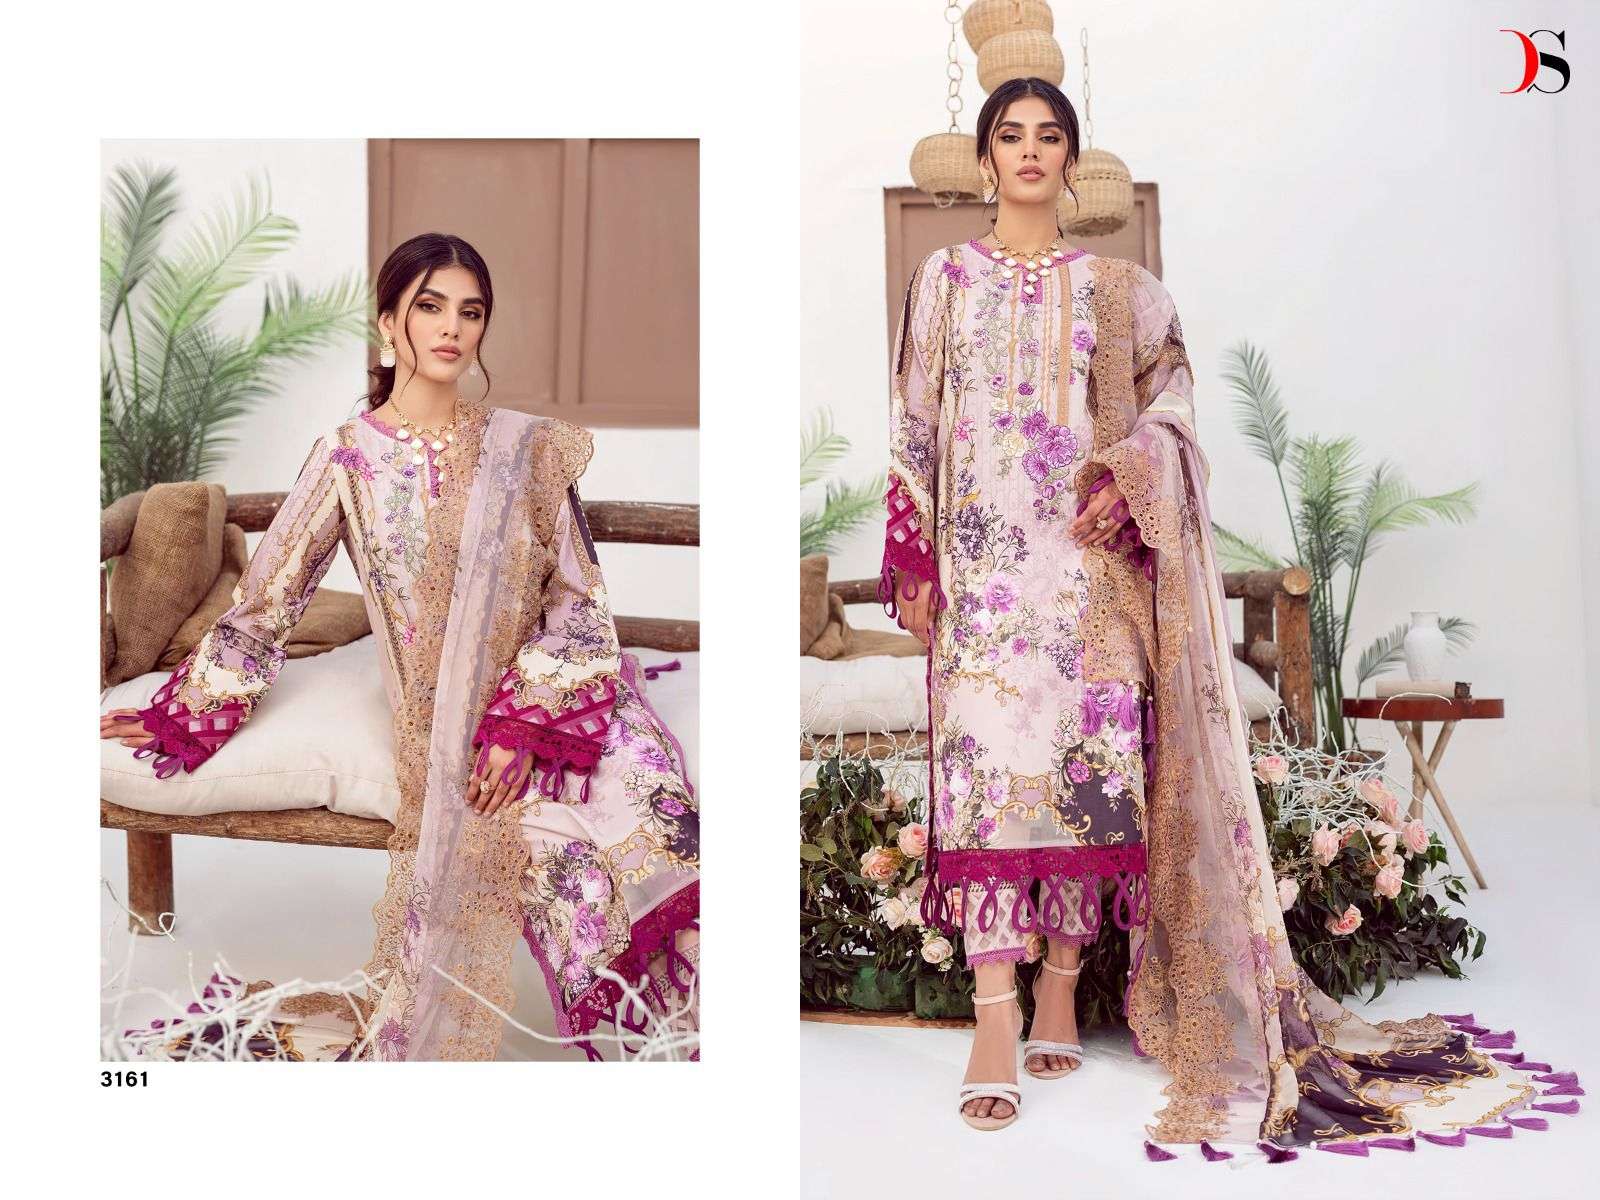 DEEPSY SUITS PRESENTS JADE NEEDLE WONDER 2023 COTTON PRINTS WITH HEAVY EMBROIDERY WHOLESALE PAKITANI SUITS